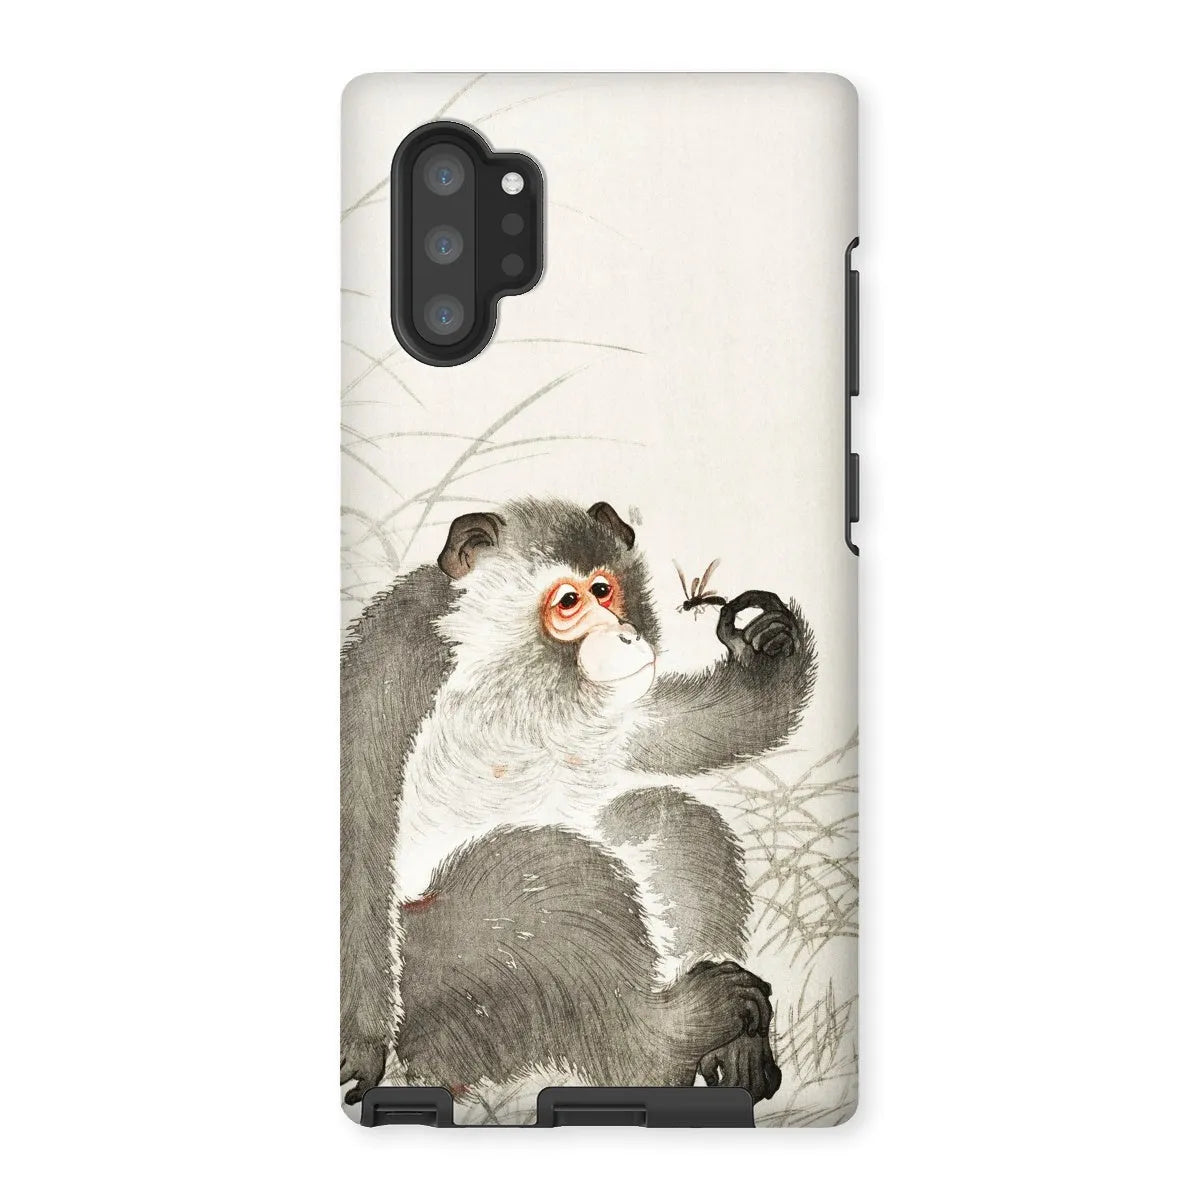 Monkey With Insect - Shin-hanga Art Phone Case - Ohara Koson - Samsung Galaxy Note 10p / Matte - Mobile Phone Cases